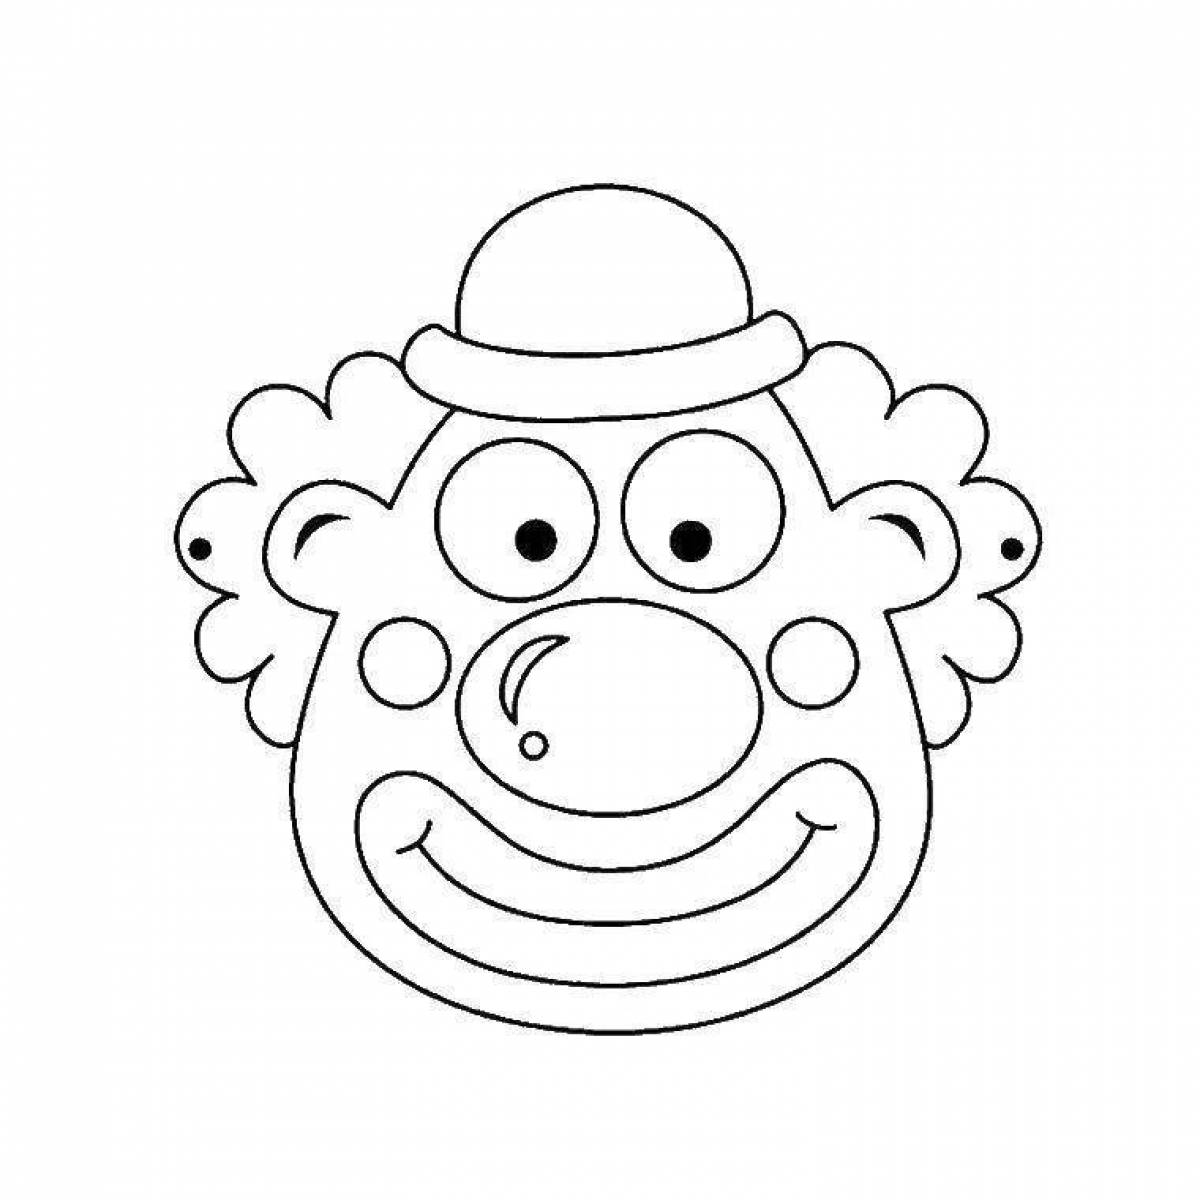 Dreamy clown coloring page